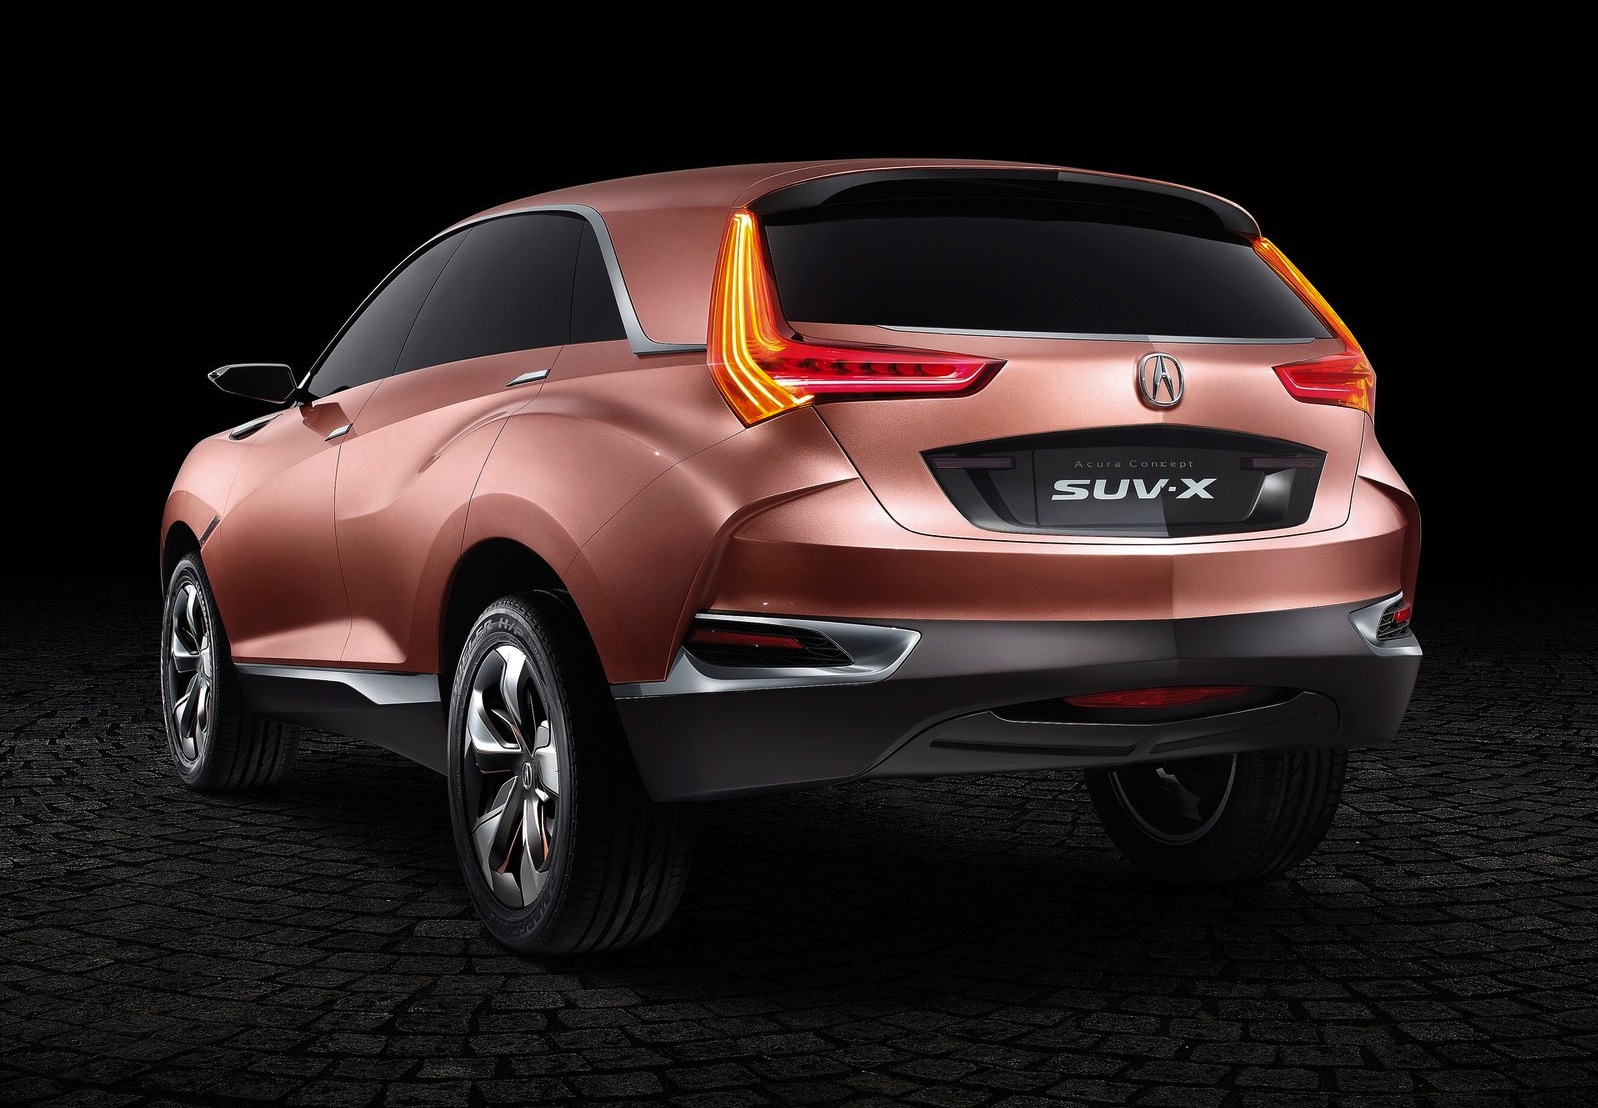 Acura Concept SUV X compact SUV headed for Chinese 